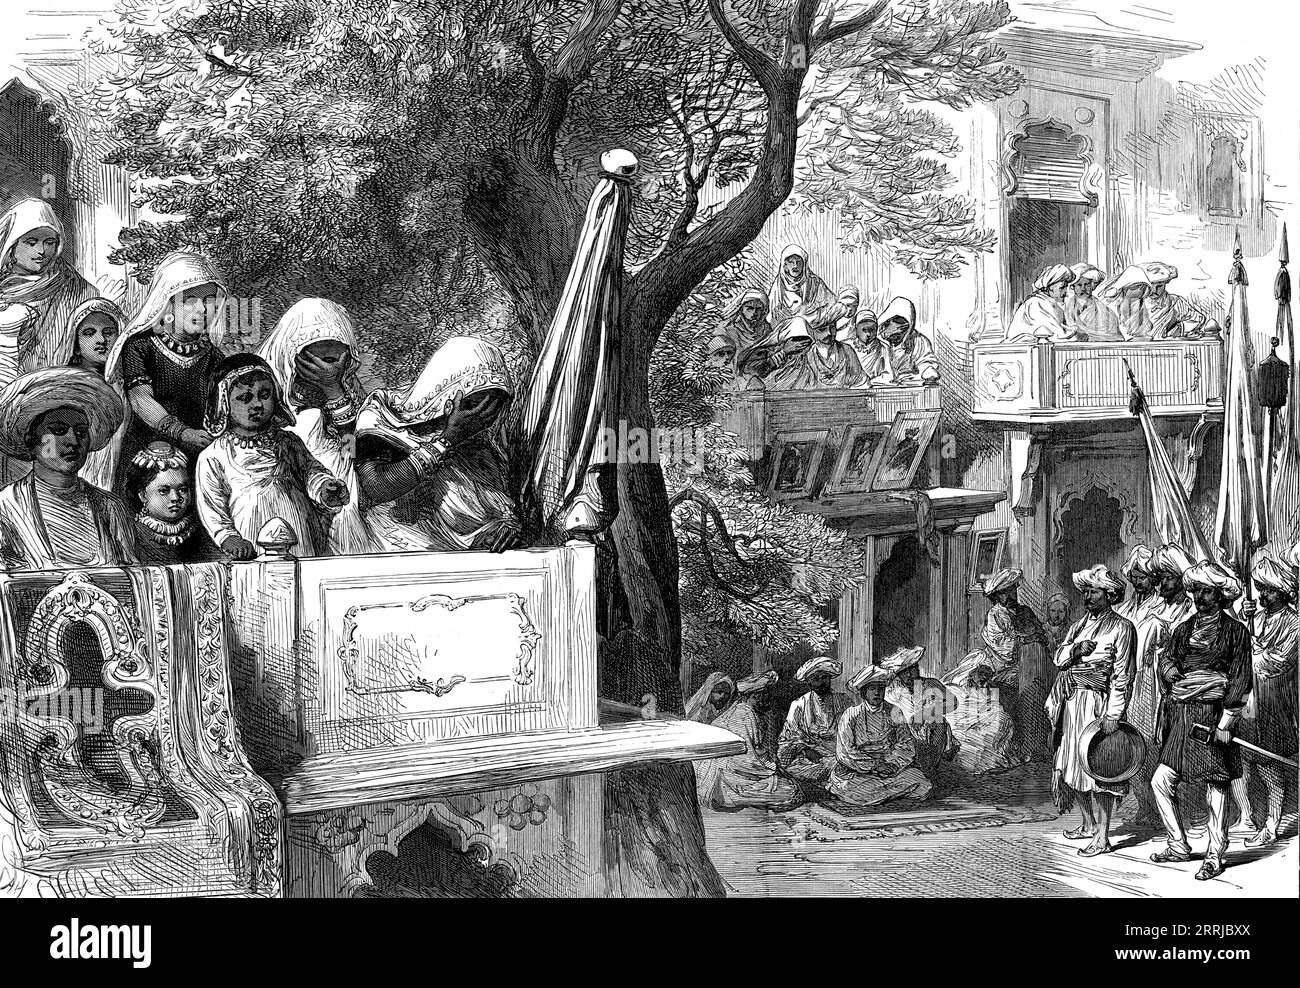 The Royal Visit to India: waiting for the Shahzadah, Gwalior, from a sketch by one of our special artists, 1876. '...his Royal Highness went to visit Scindia at Gwalior...The townspeople of Lushkur, adjoining Scindia's residence, were in eager expectation of the arrival of the Prince, or the &quot;Shah-zadah,&quot; as they called him; and these spectators in waiting were made the subject of one of Mr. William Simpson's sketches, whilst he likewise waited there for the Prince of Wales'. People lining the streets during a visit by the future King Edward VII, representing his mother Queen Victori Stock Photo